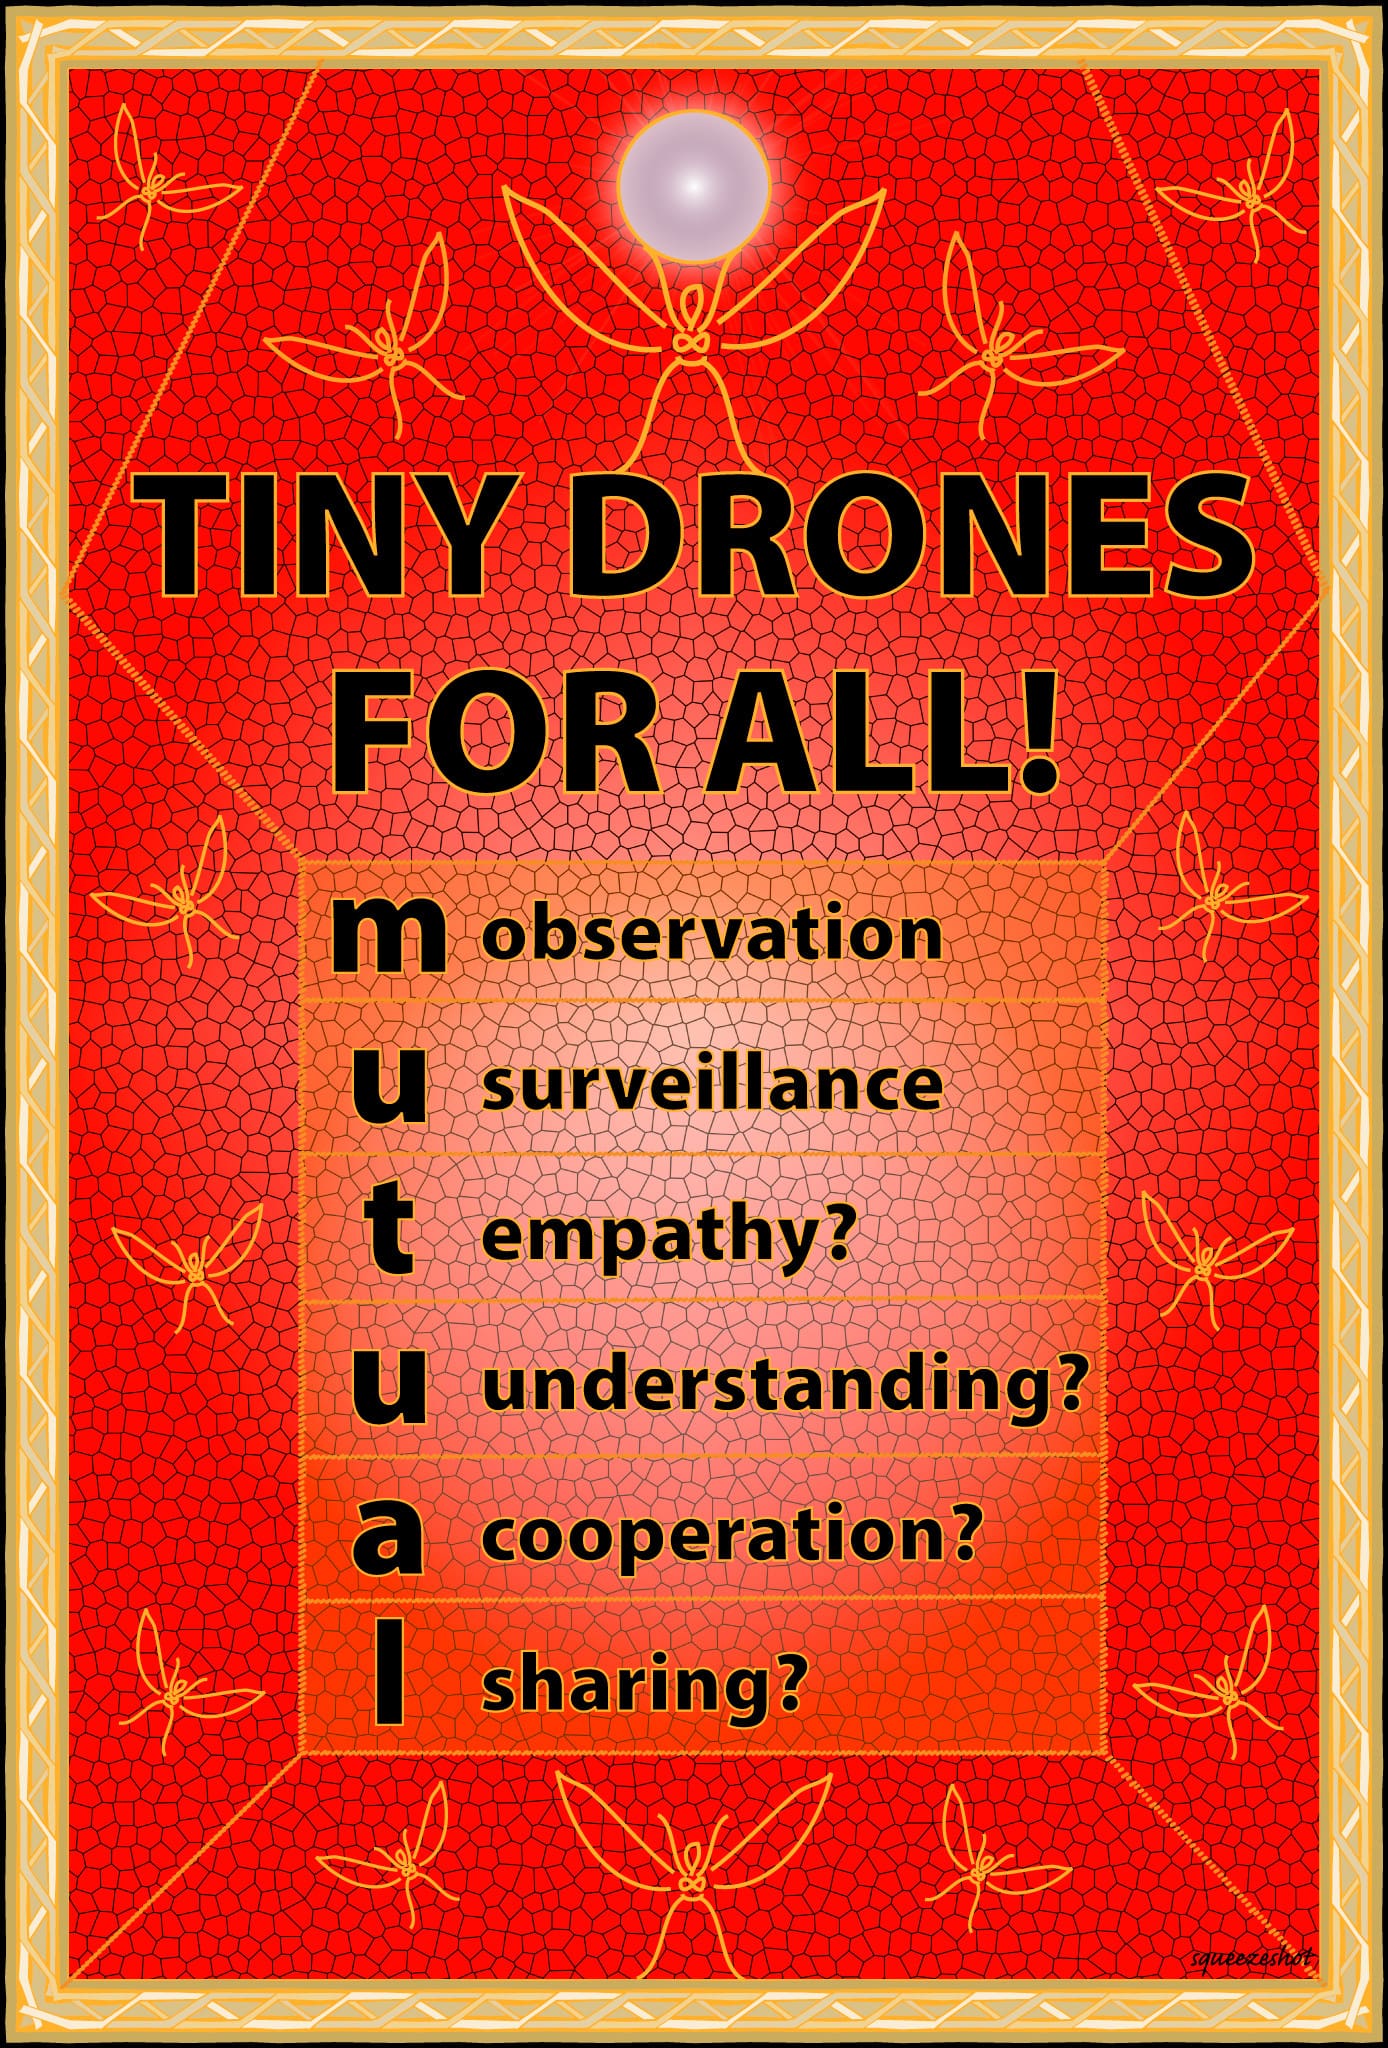 Tiny drones for all!